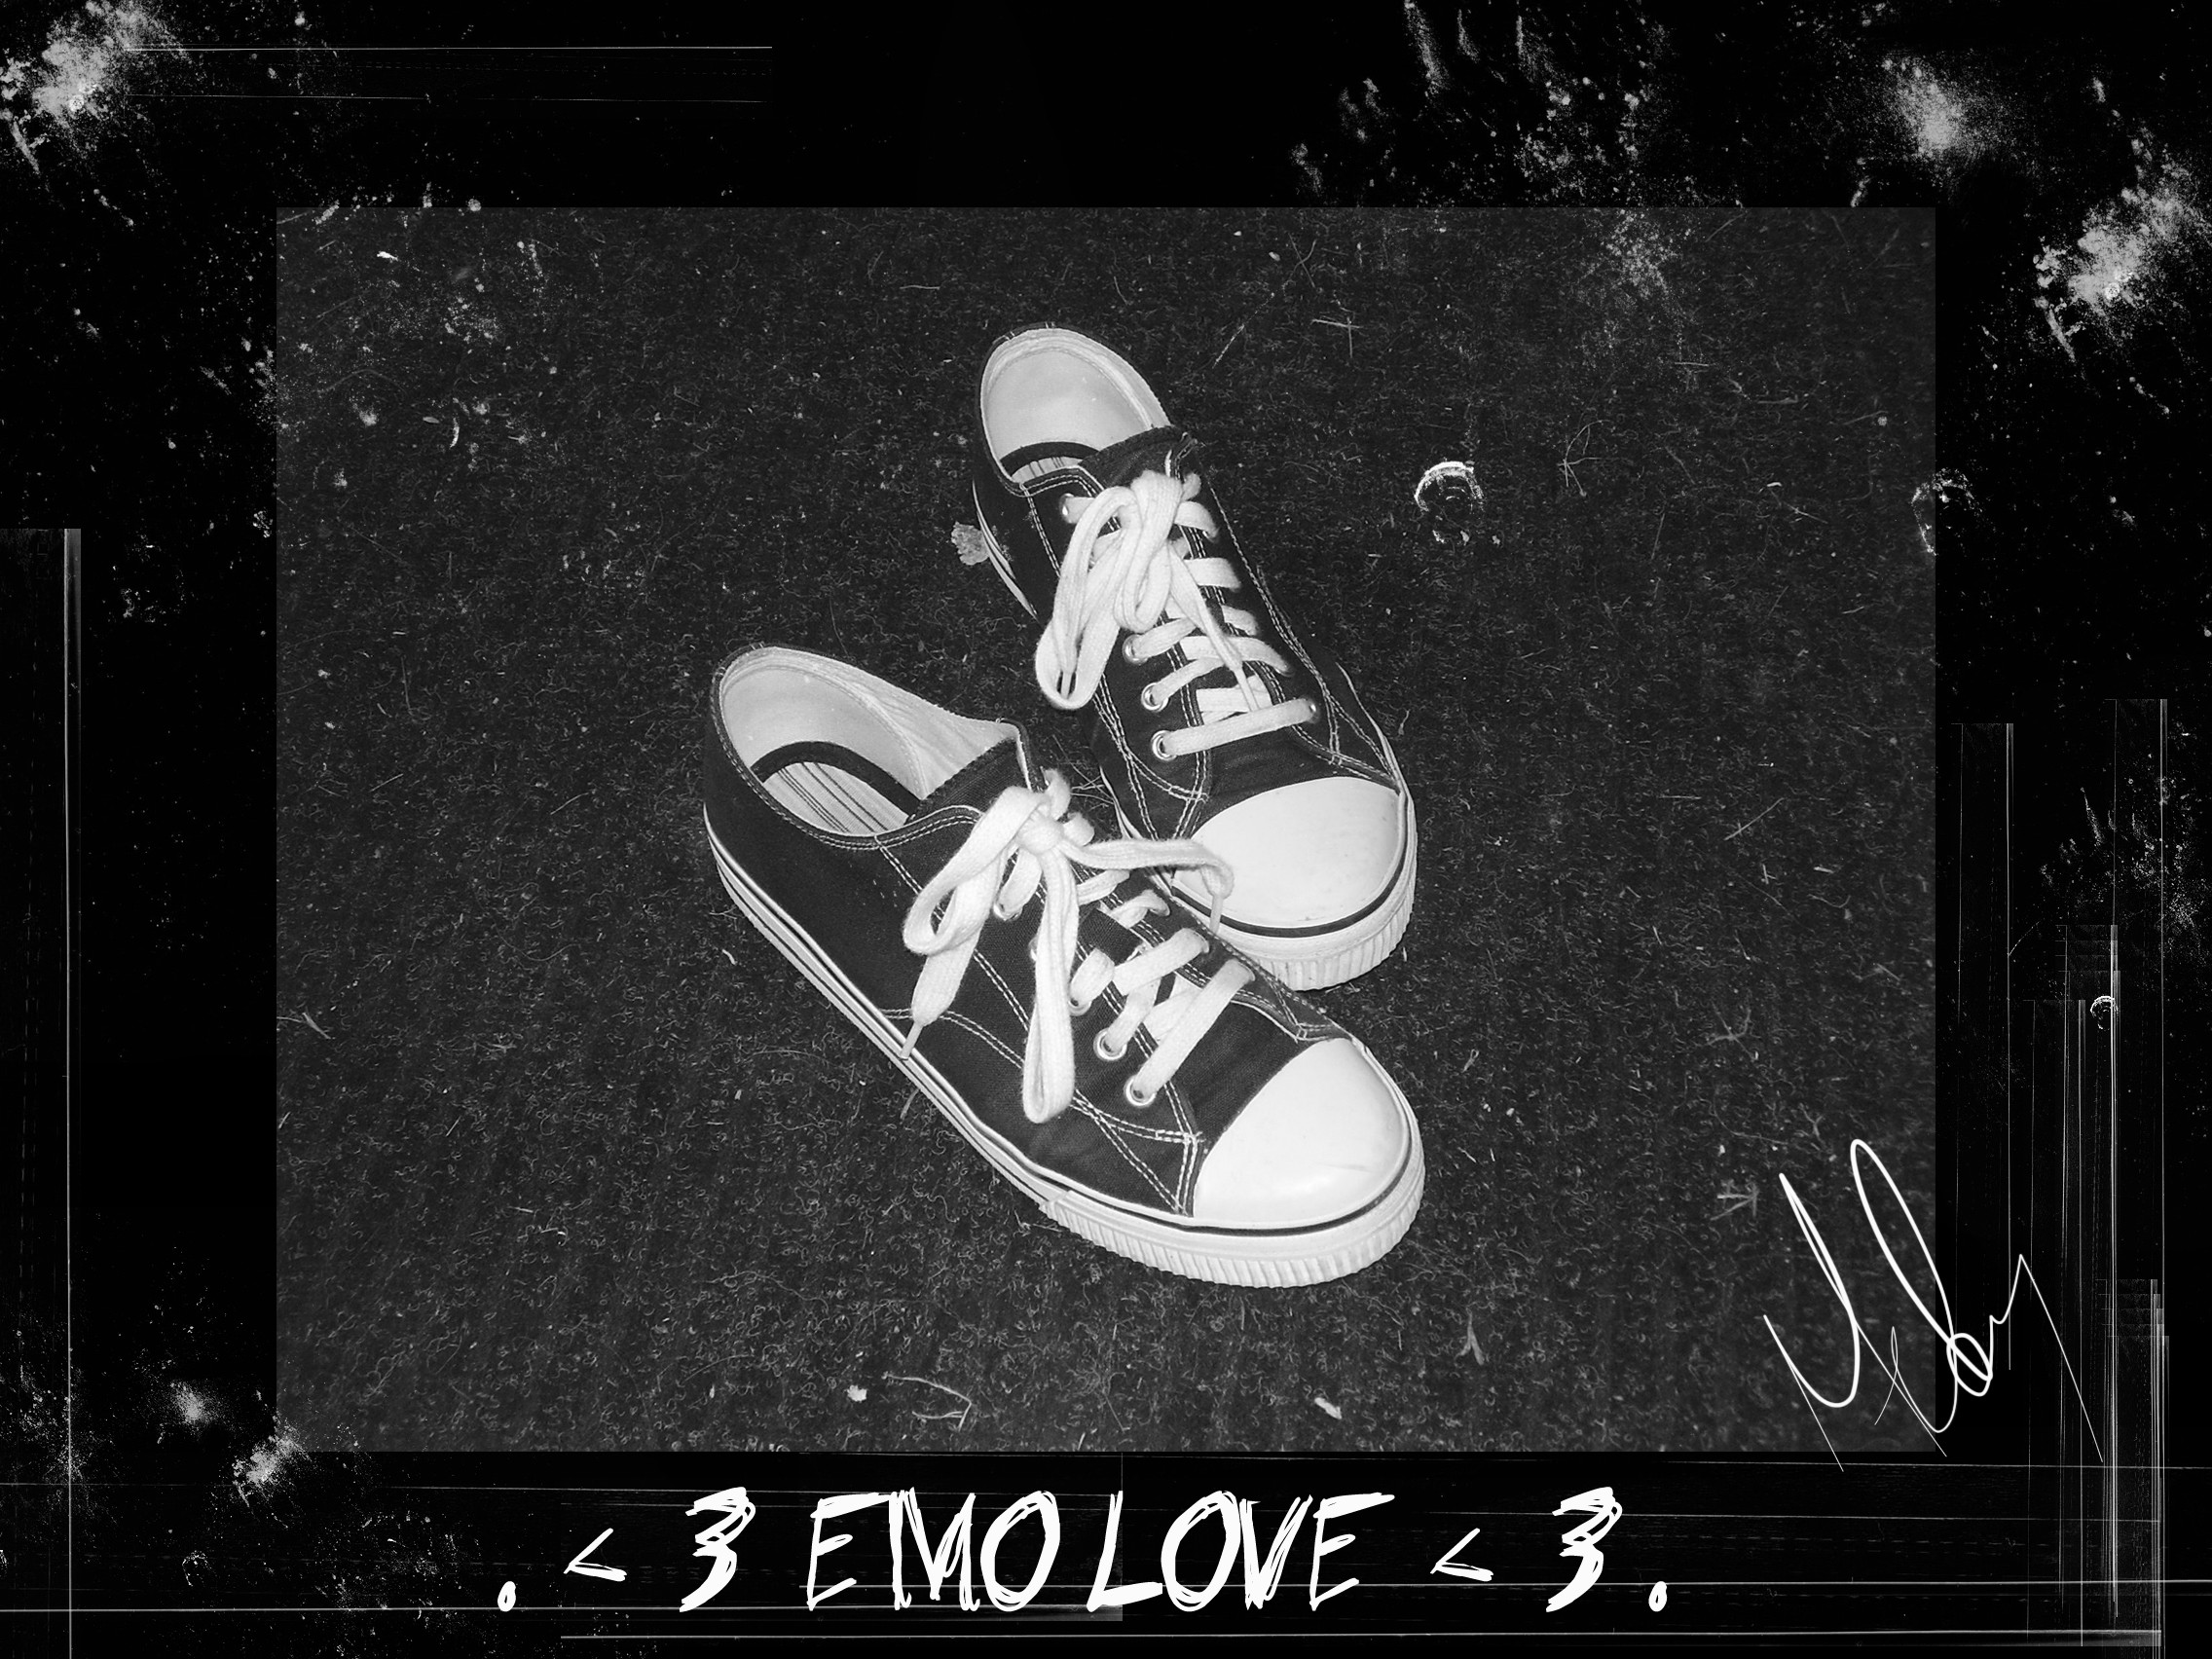 2272x1704 Emo love wallpaper from EMO wallpapers